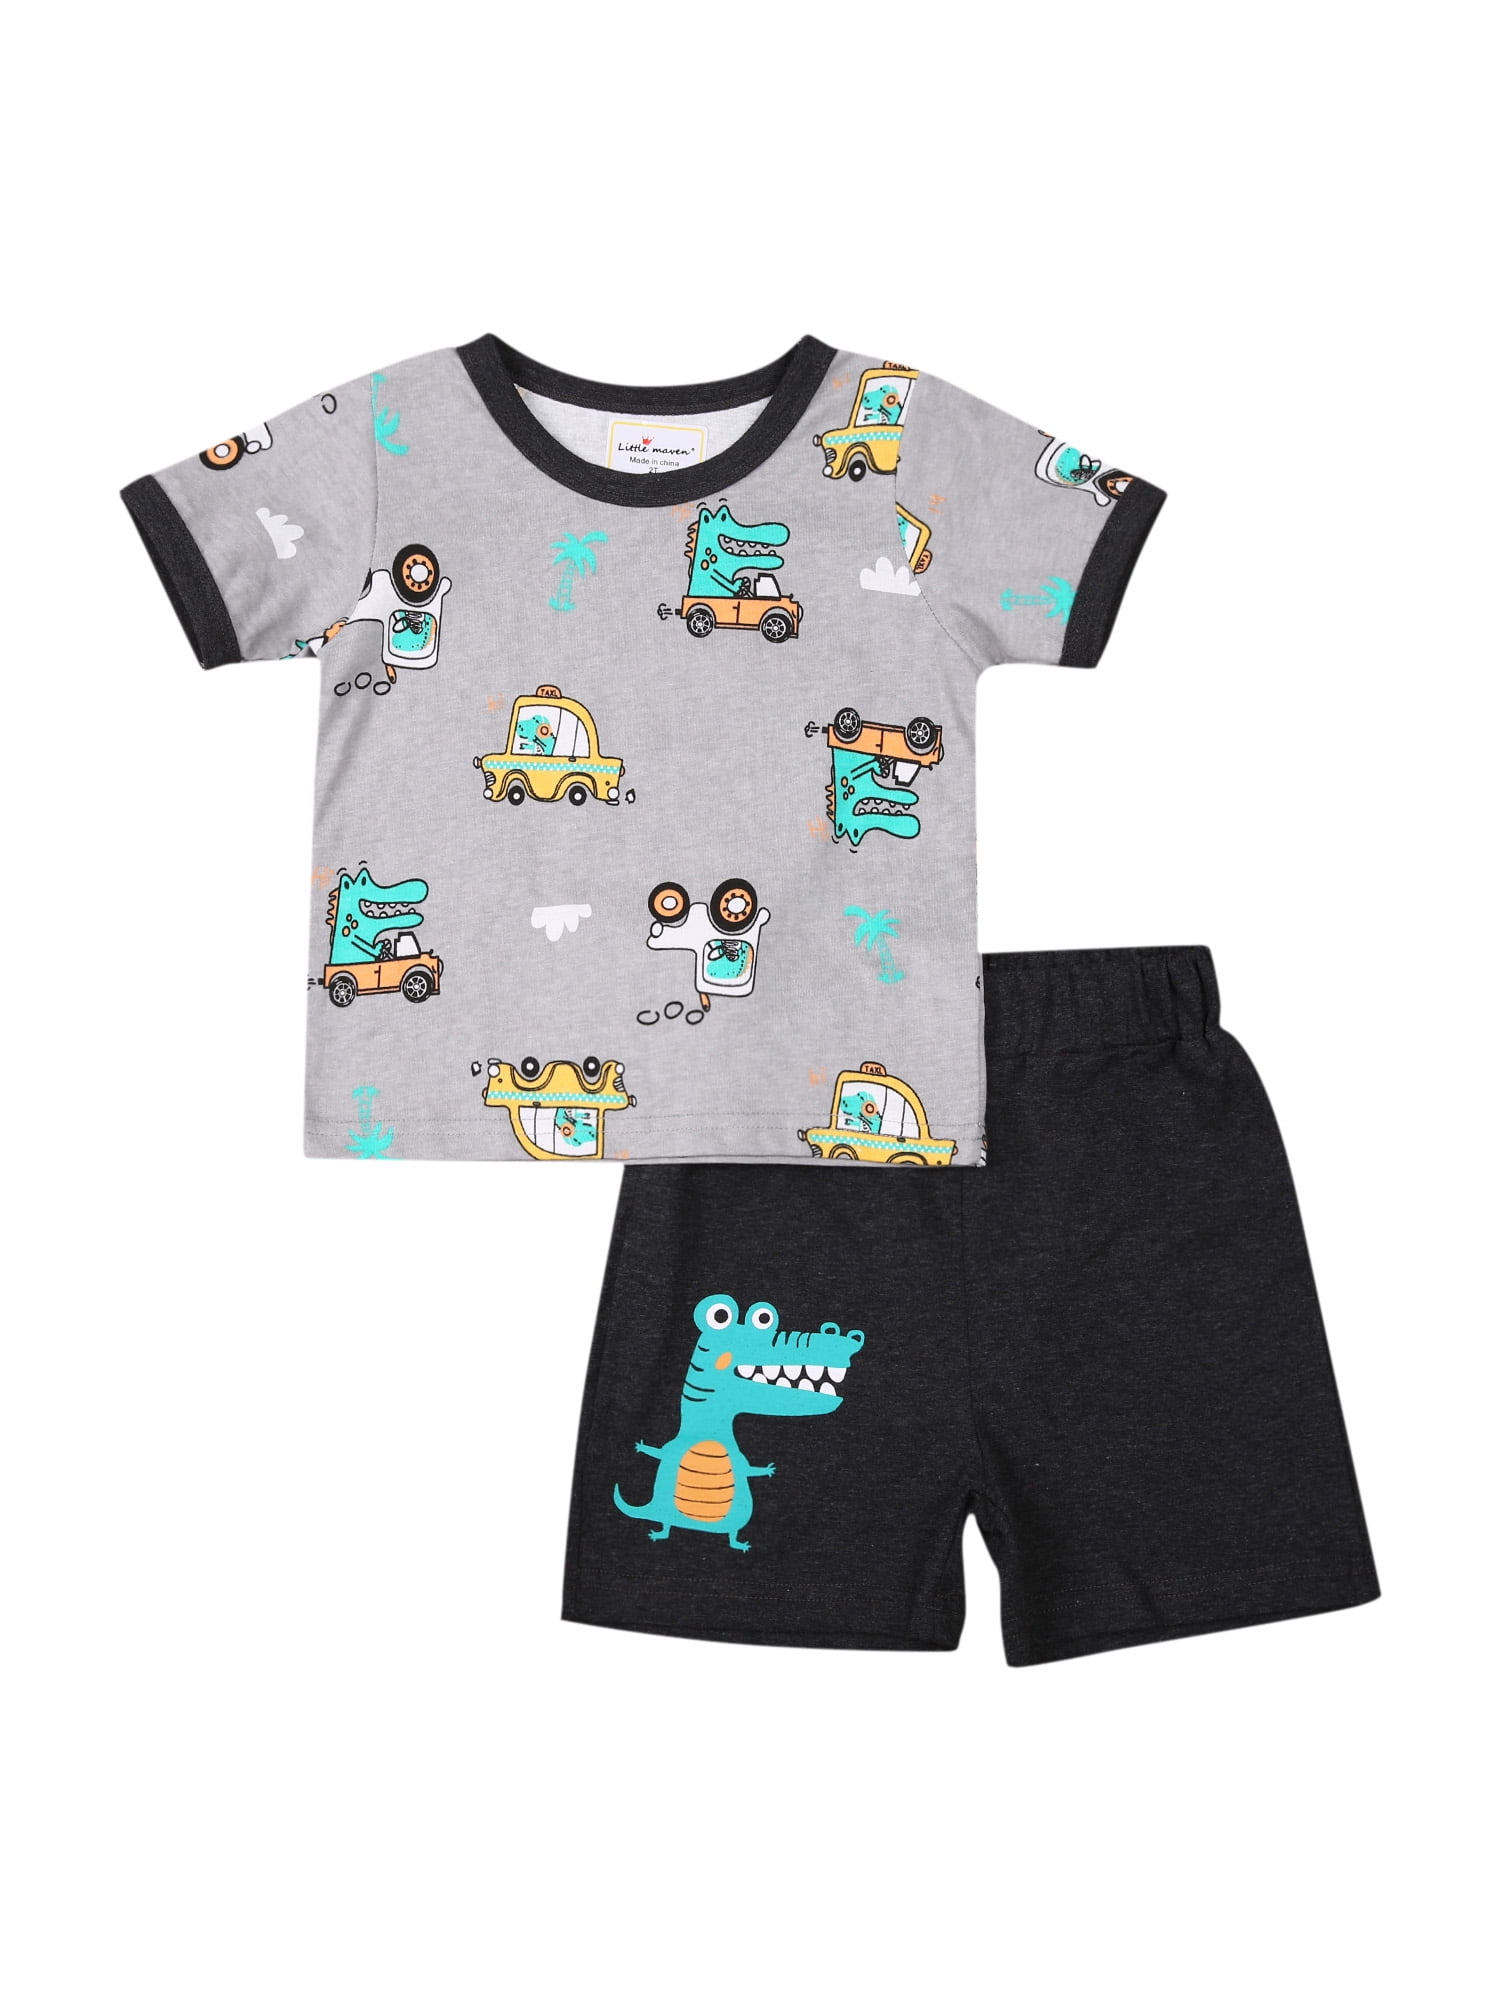 Toddler Child Baby Boys Girls Short Sleeve Cartoon Top+Shorts Outfit Clothes Set